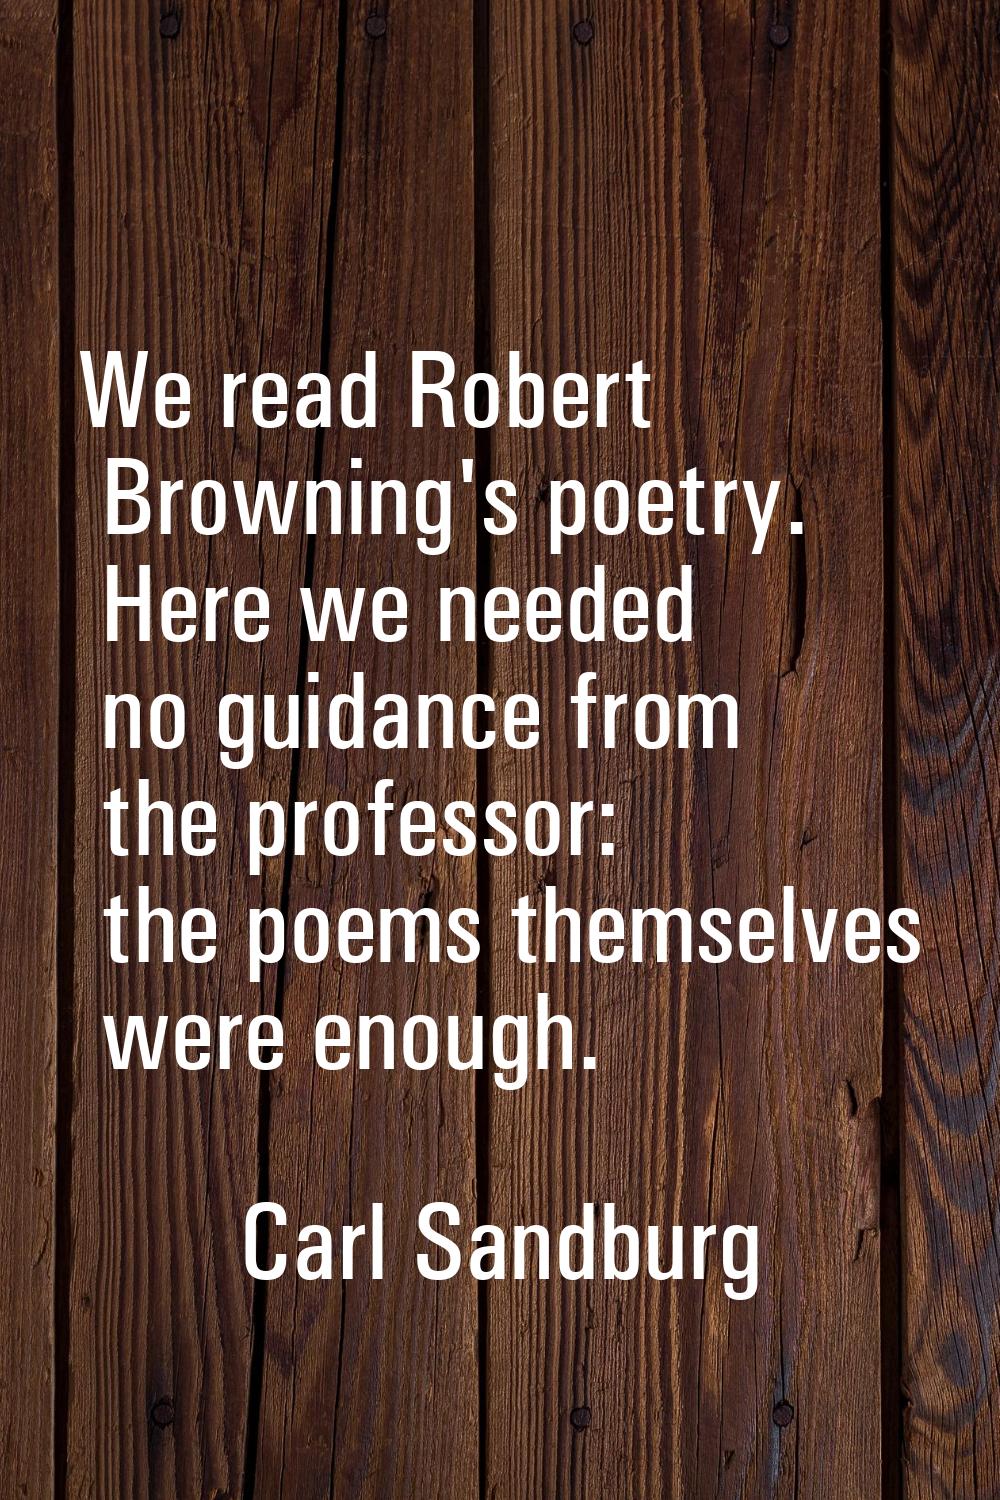 We read Robert Browning's poetry. Here we needed no guidance from the professor: the poems themselv